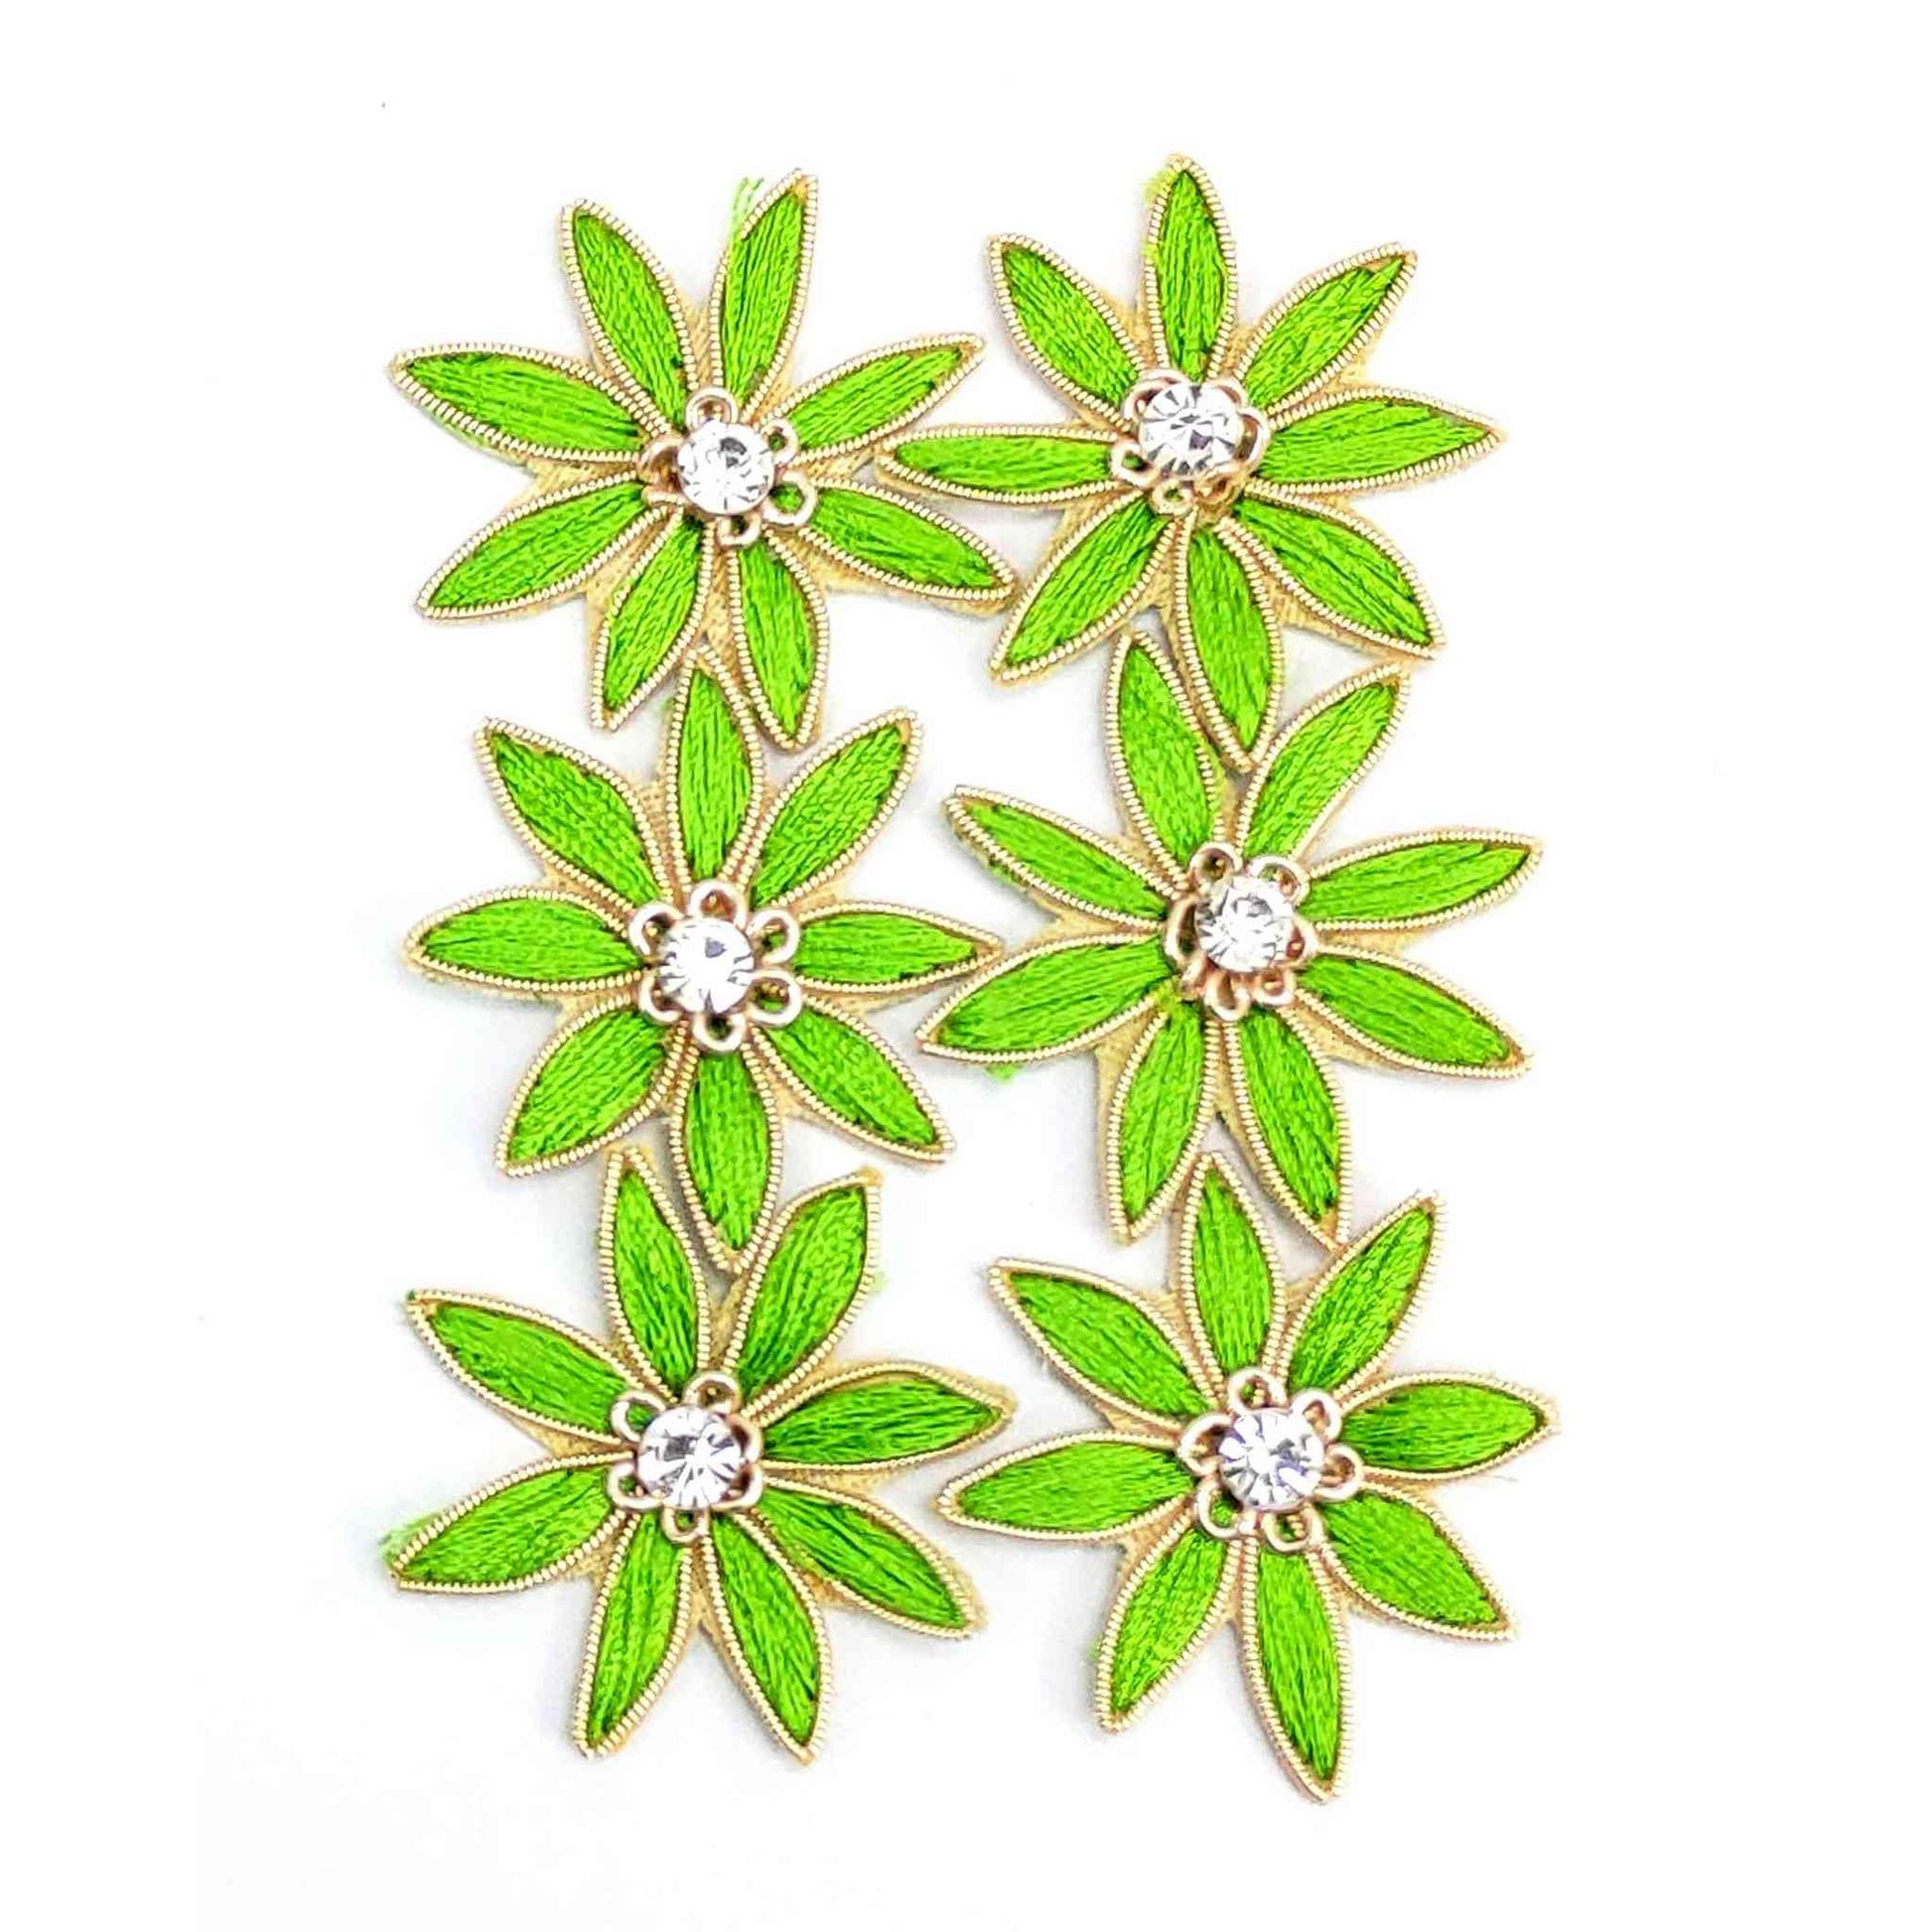 Threaded Strar Style Buti for DIY Craft, Trousseau Packing or Decoration (Bunch of 12) - Design 215, Green - Indian Petals